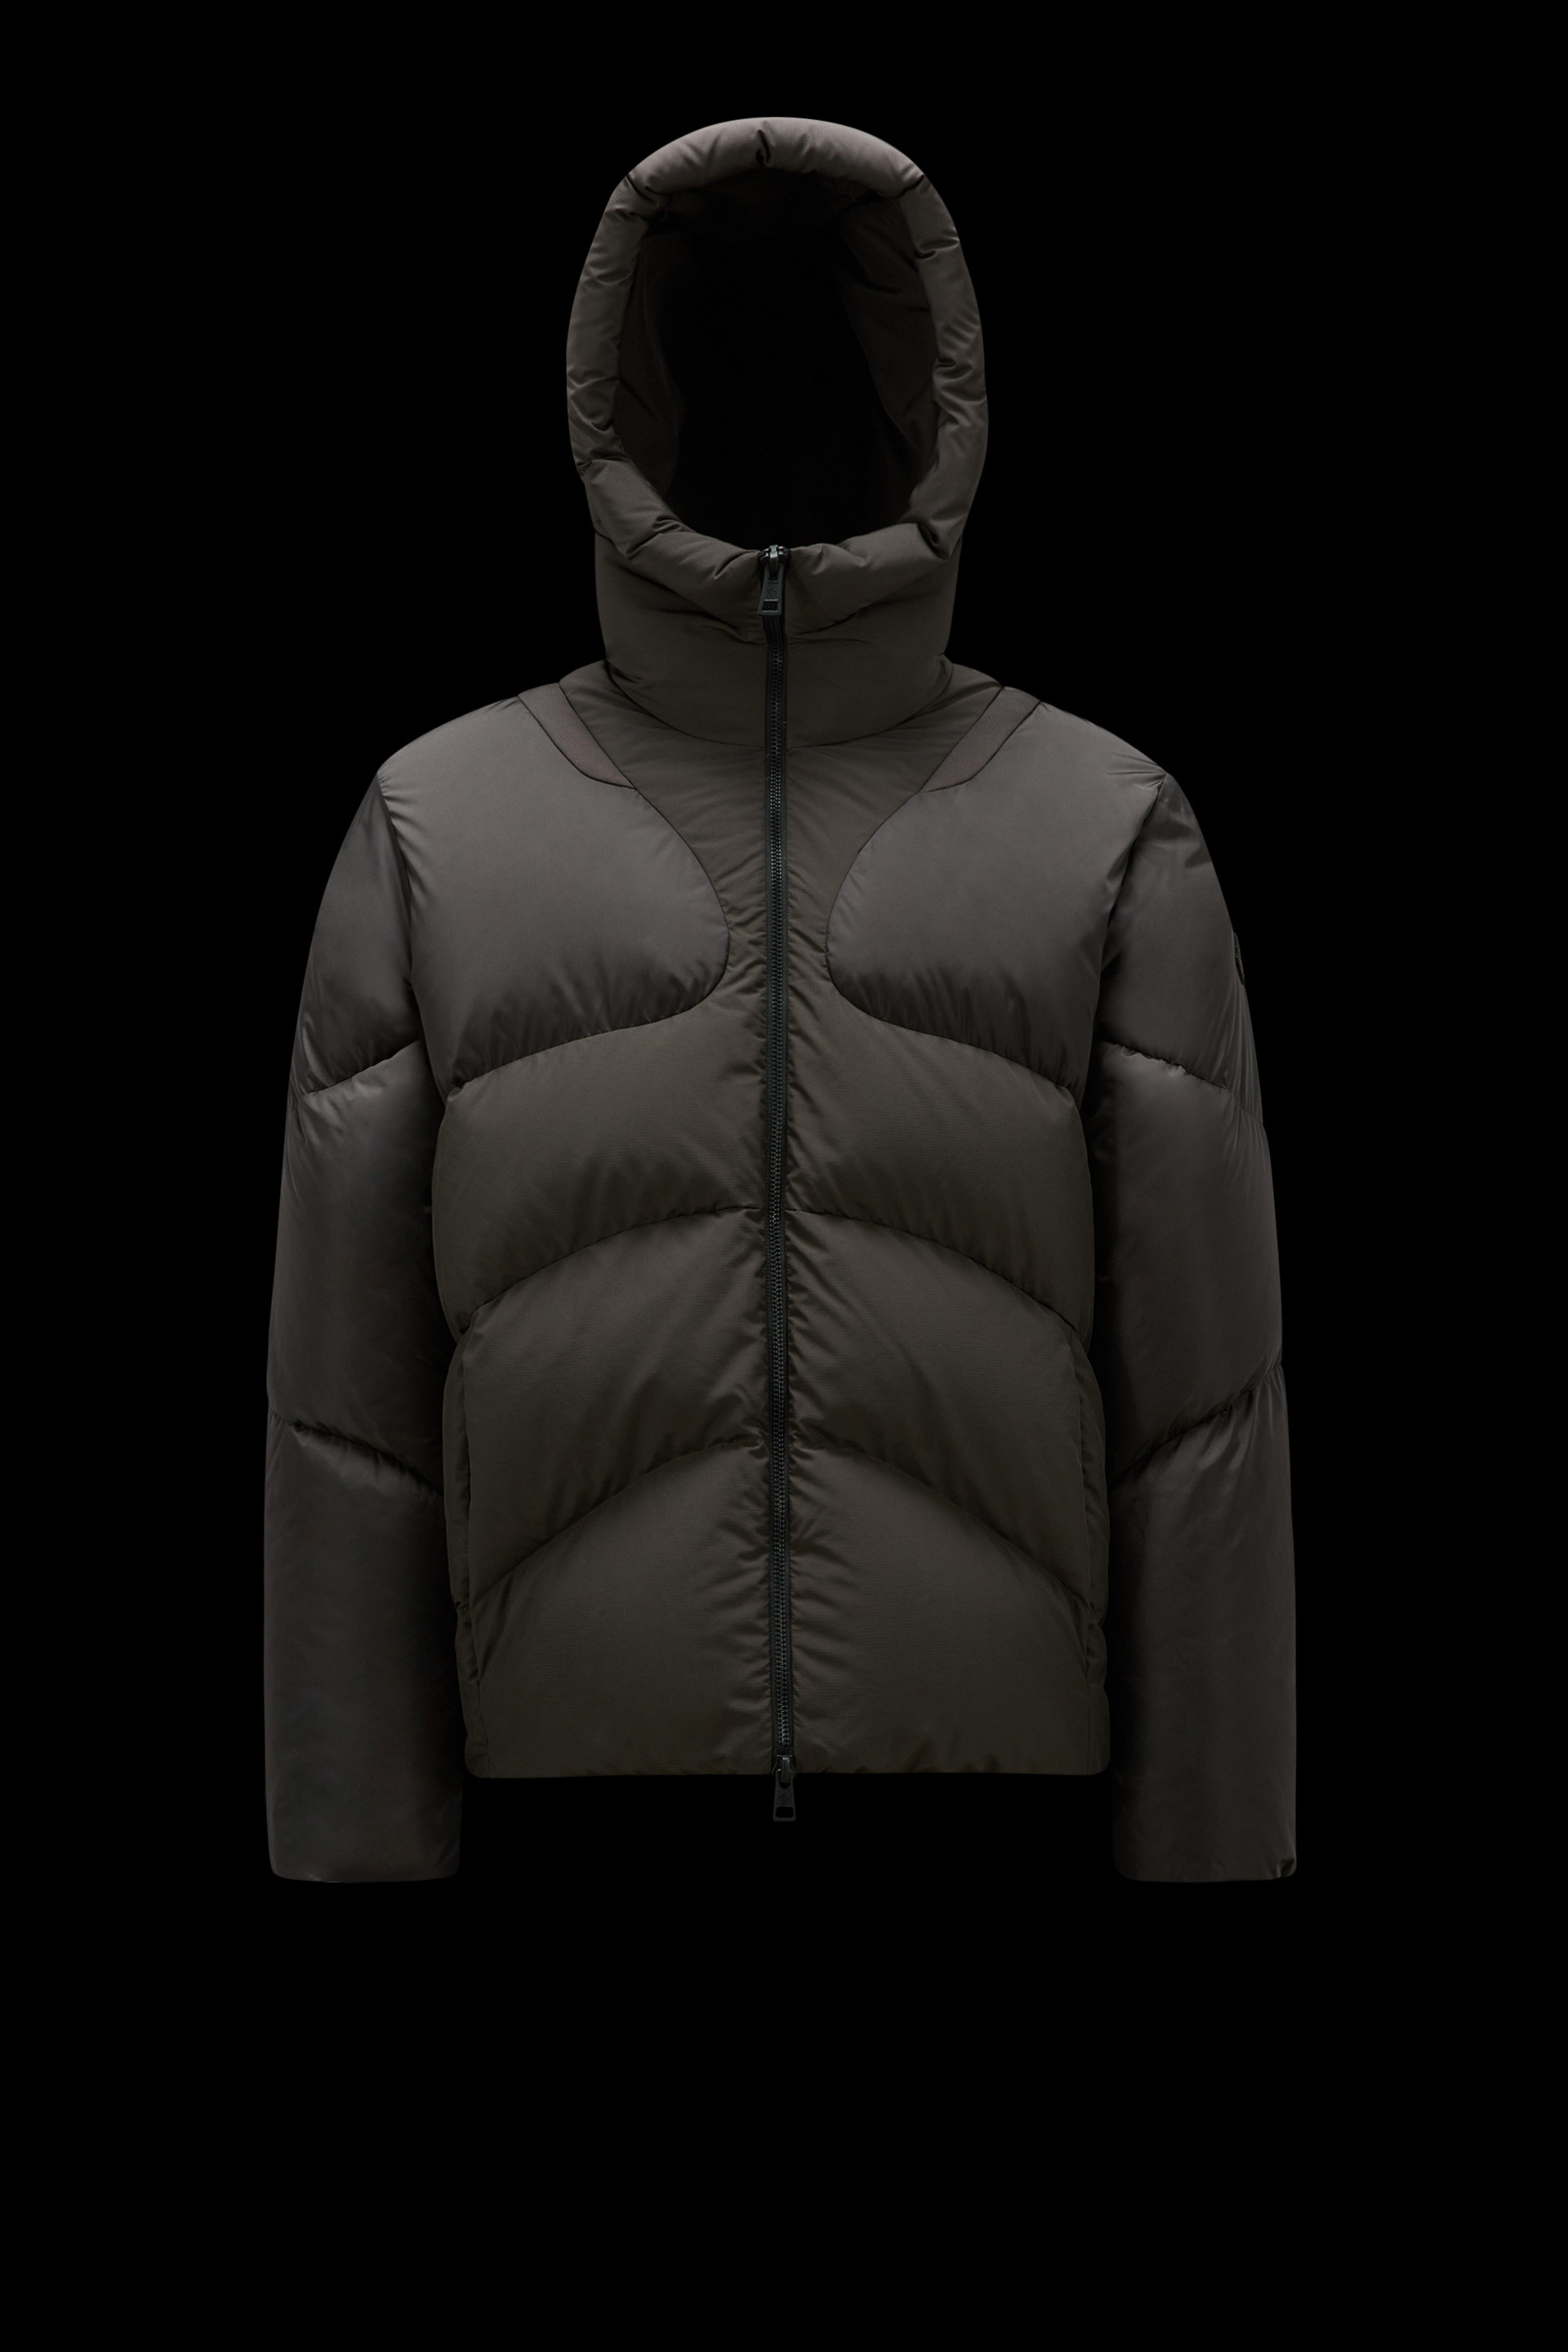 Moncler - Protecting tomorrow. Our Born To Protect